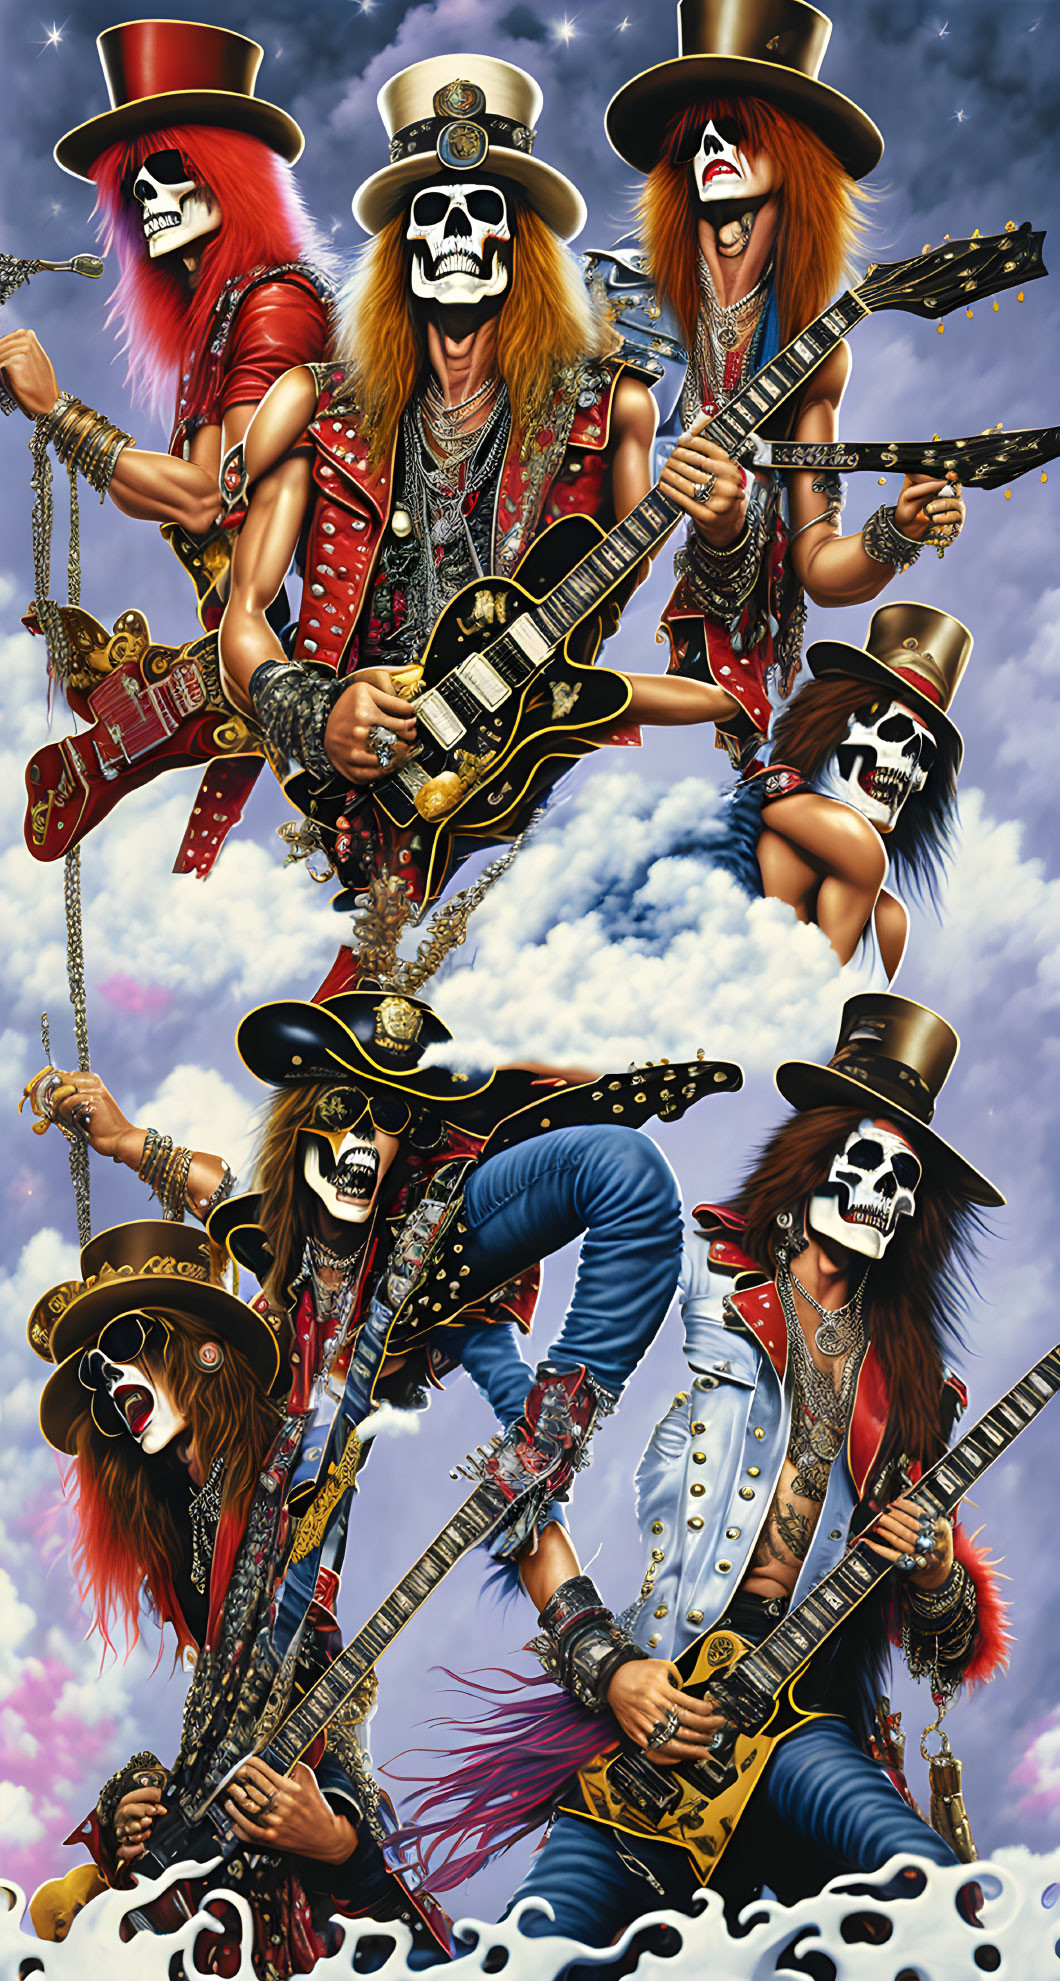 Vibrant illustration: Four skeleton rockers playing guitars against cloudy sky